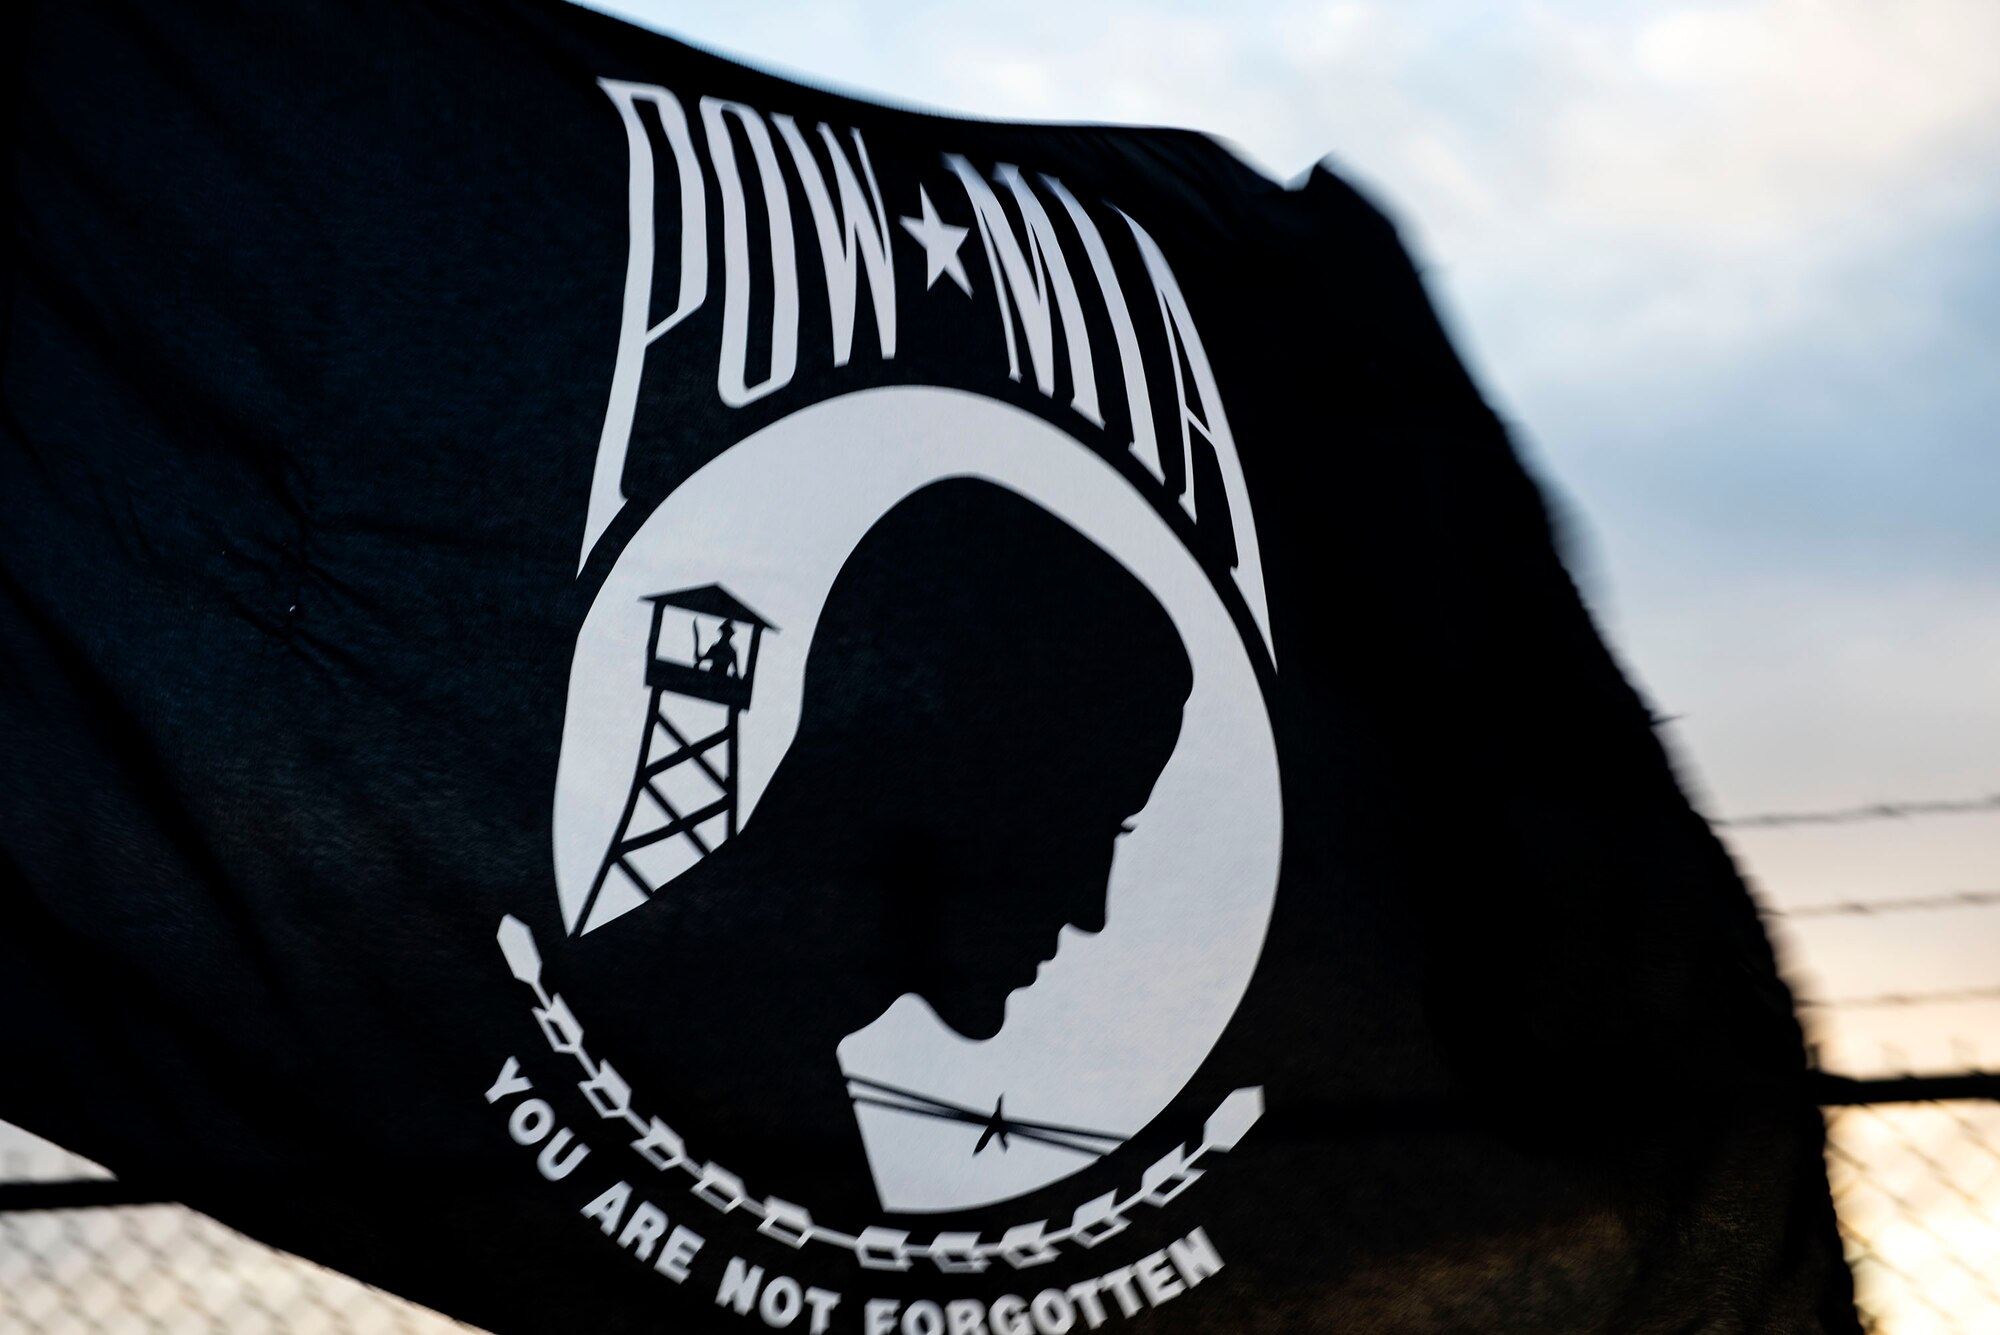 A POW/MIA flag blows in the wind during the POW/MIA Recognition Day ruck march Sept. 20, 2019, at Moody Air Force Base, Ga. The 347th Operations Support Squadron hosted the 24-hour ruck march to pay tribute to those who’ve been captured or missing in the line of duty. (U.S. Air Force photo by Senior Airman Erick Requadt)